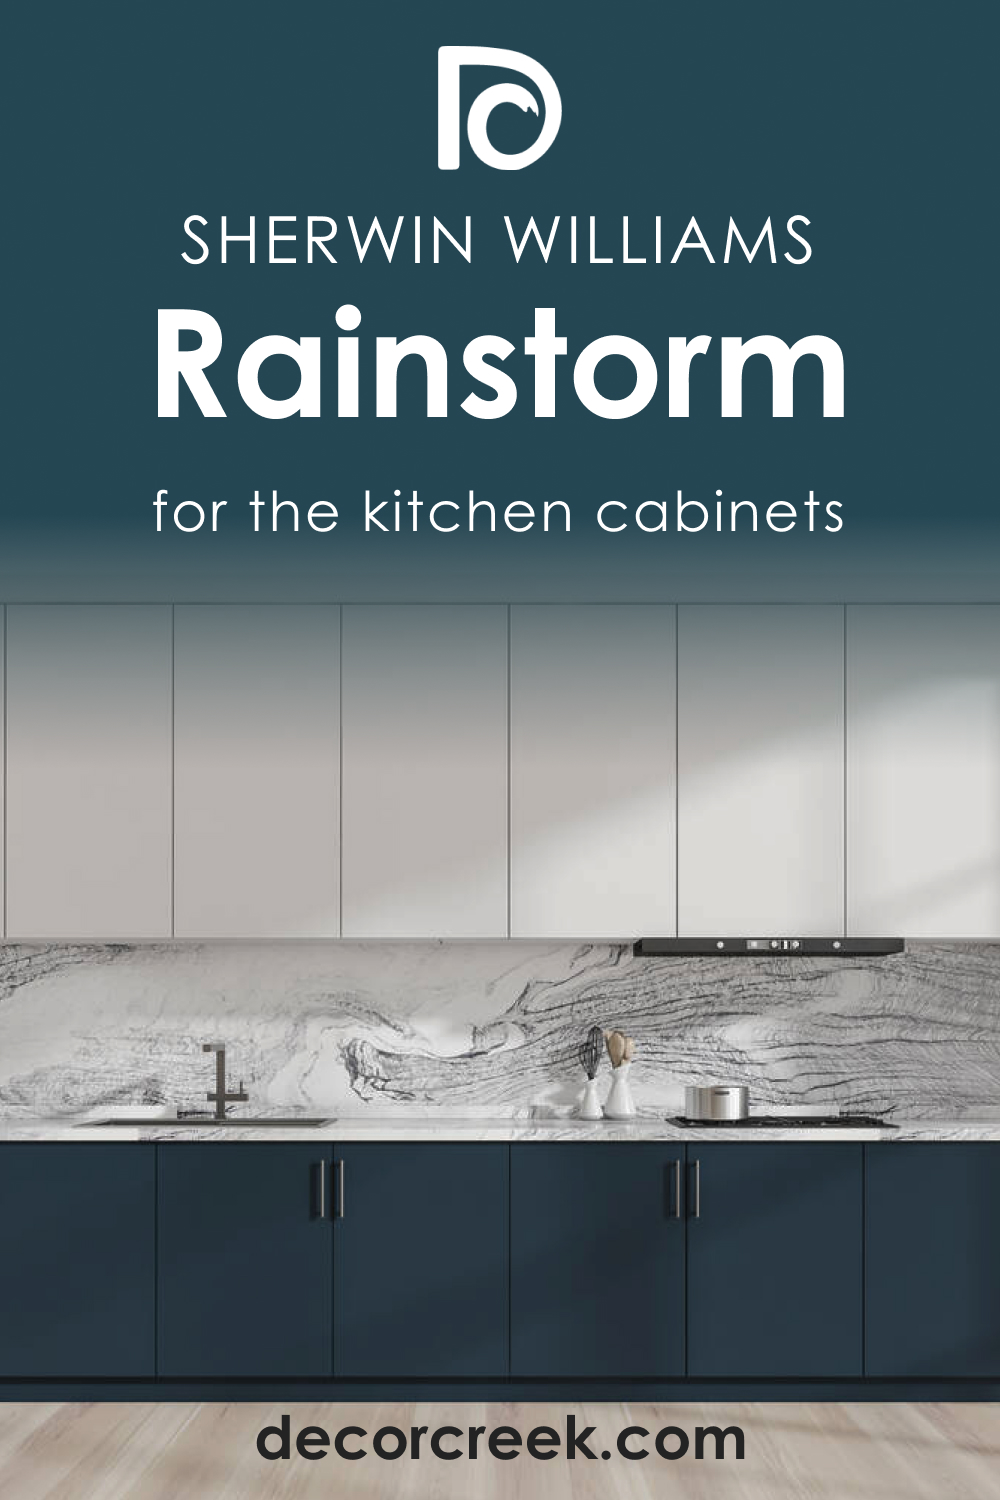 How to Use SW 6230 Rainstorm for the Kitchen Cabinets?